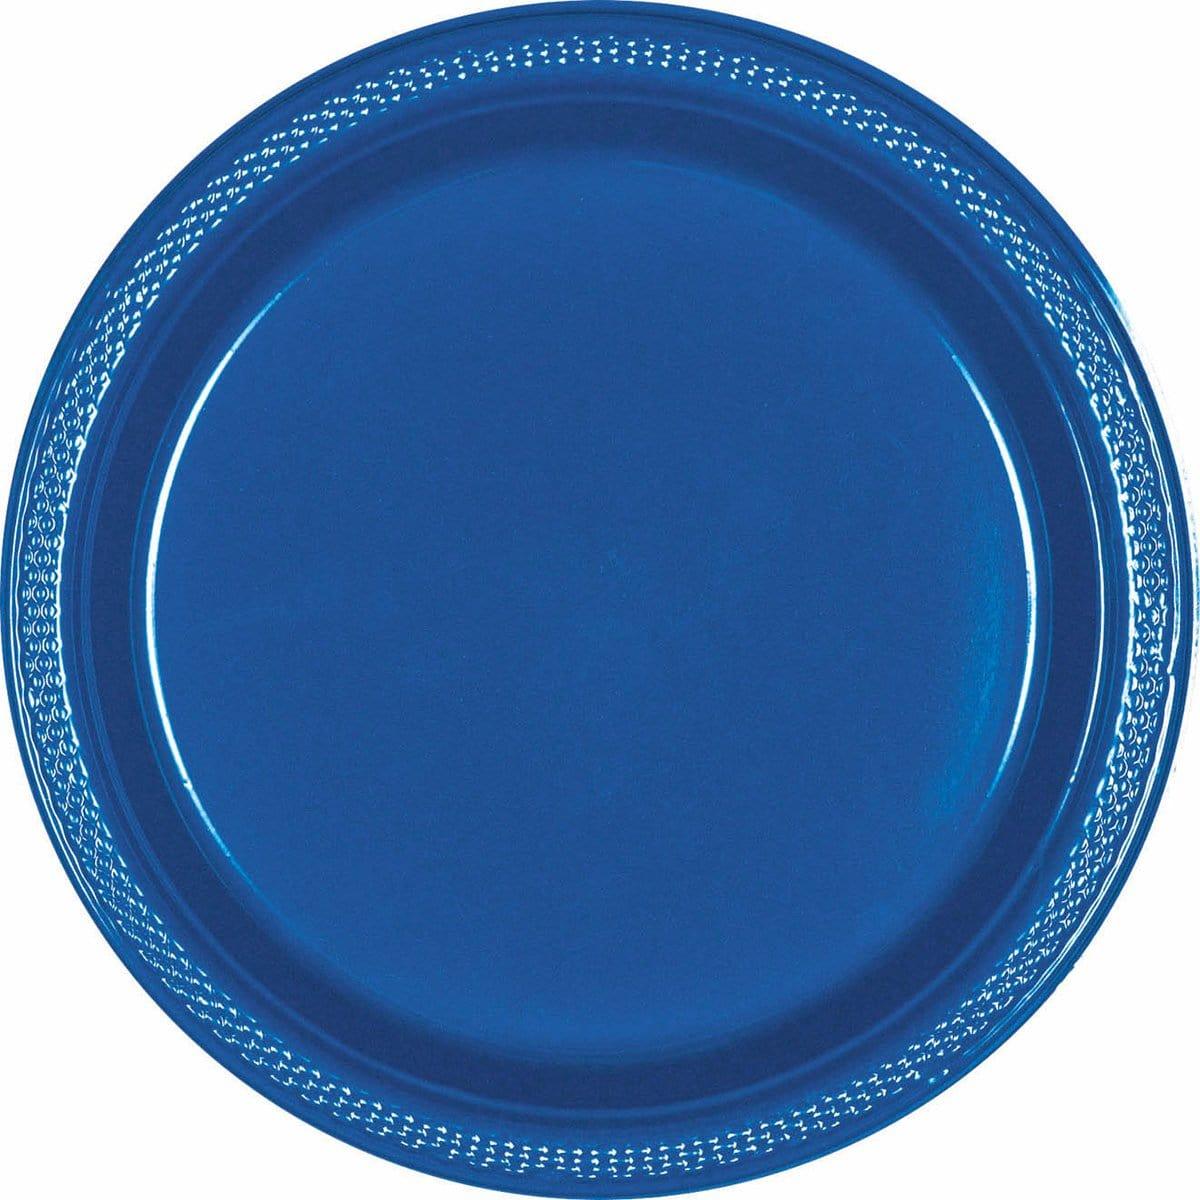 Buy Plasticware Plastic Plates - Royal Blue 9 in. 20/pkg sold at Party Expert